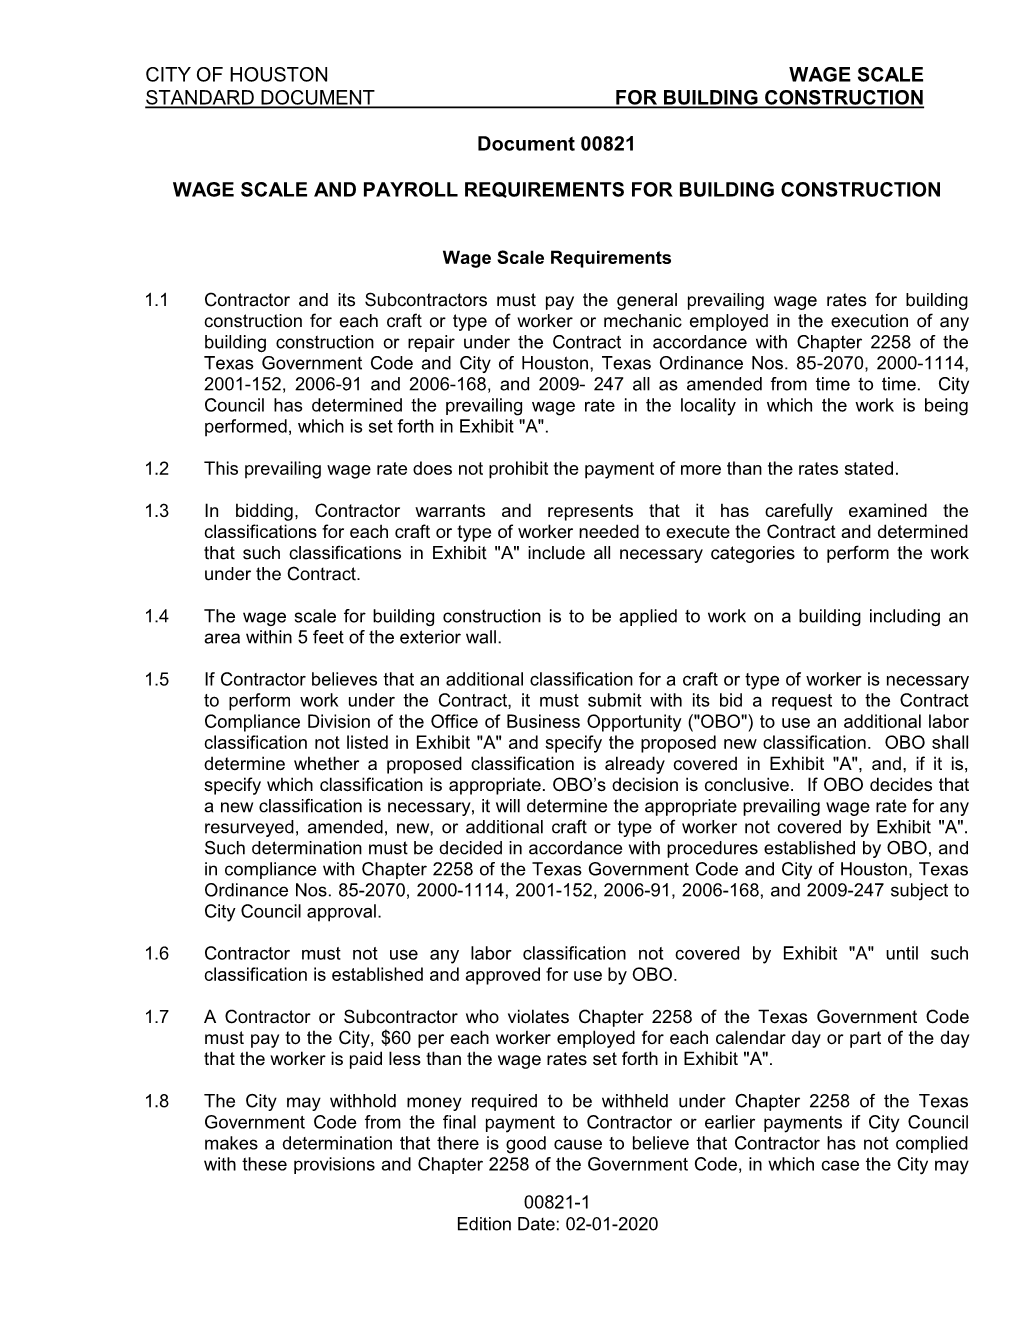 City of Houston Wage Scale Standard Document for Building Construction